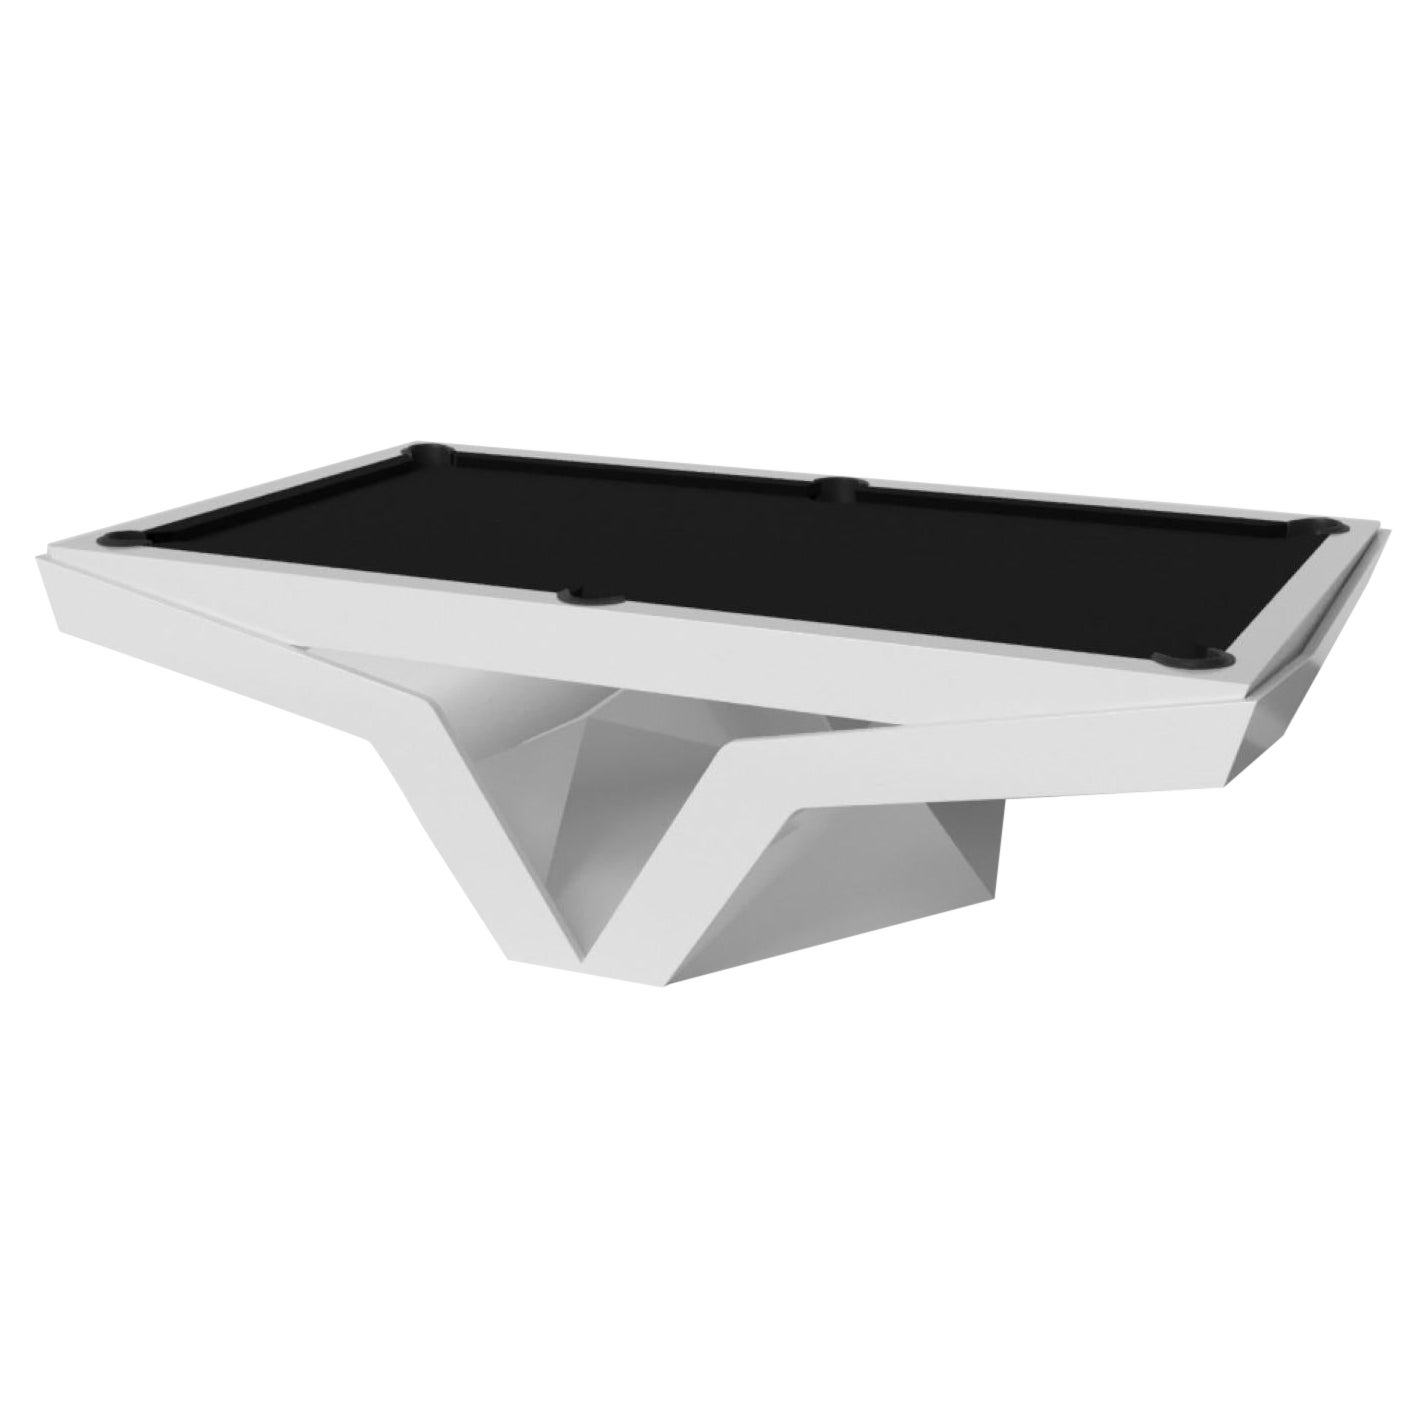 Elevate Customs Enzo Pool Table / Solid Pantone White Color in 8.5' -Made in USA